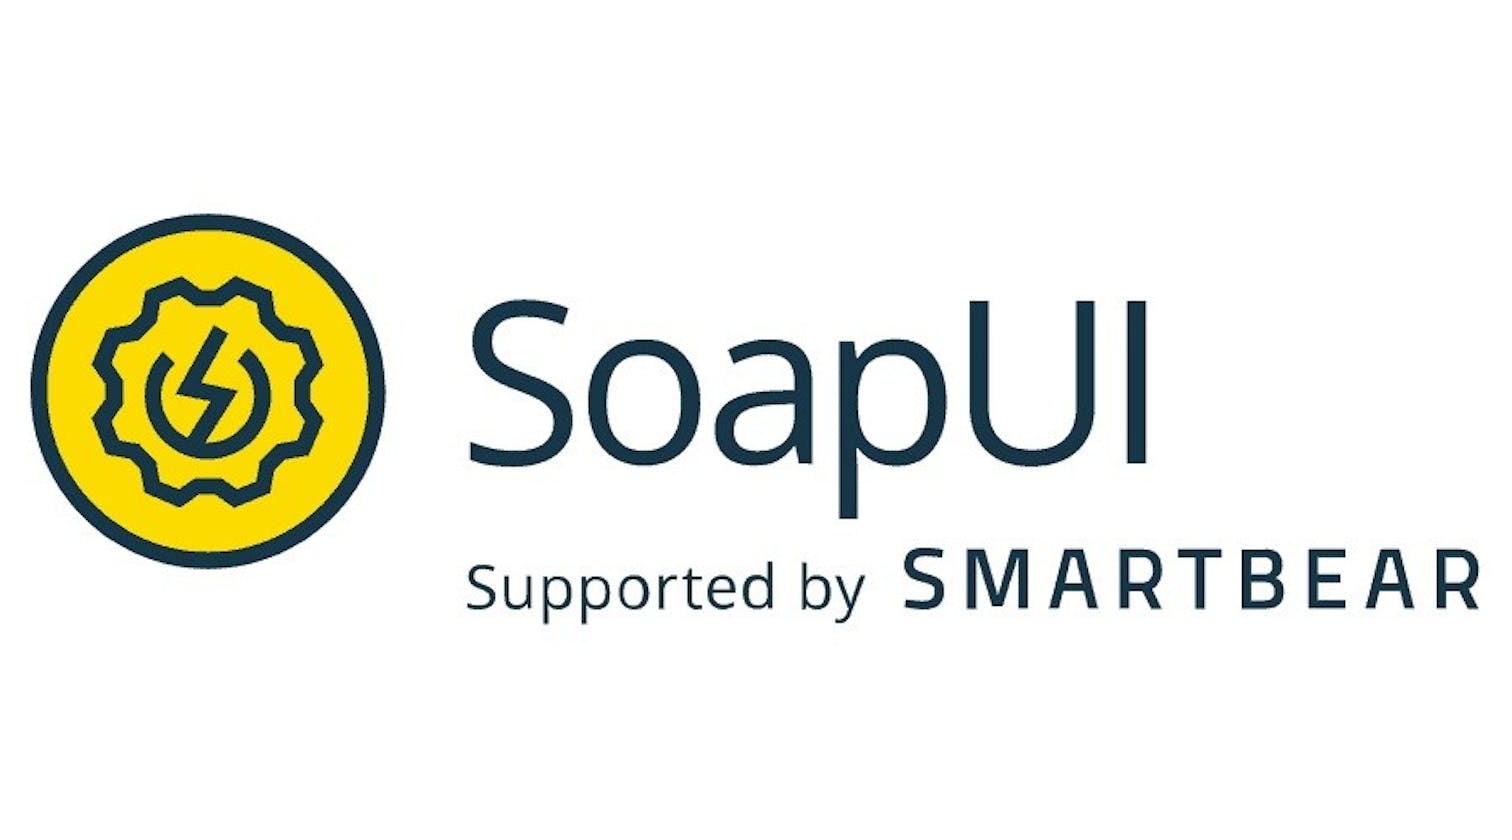 Getting Started with SOAPUI: A Beginner's Guide